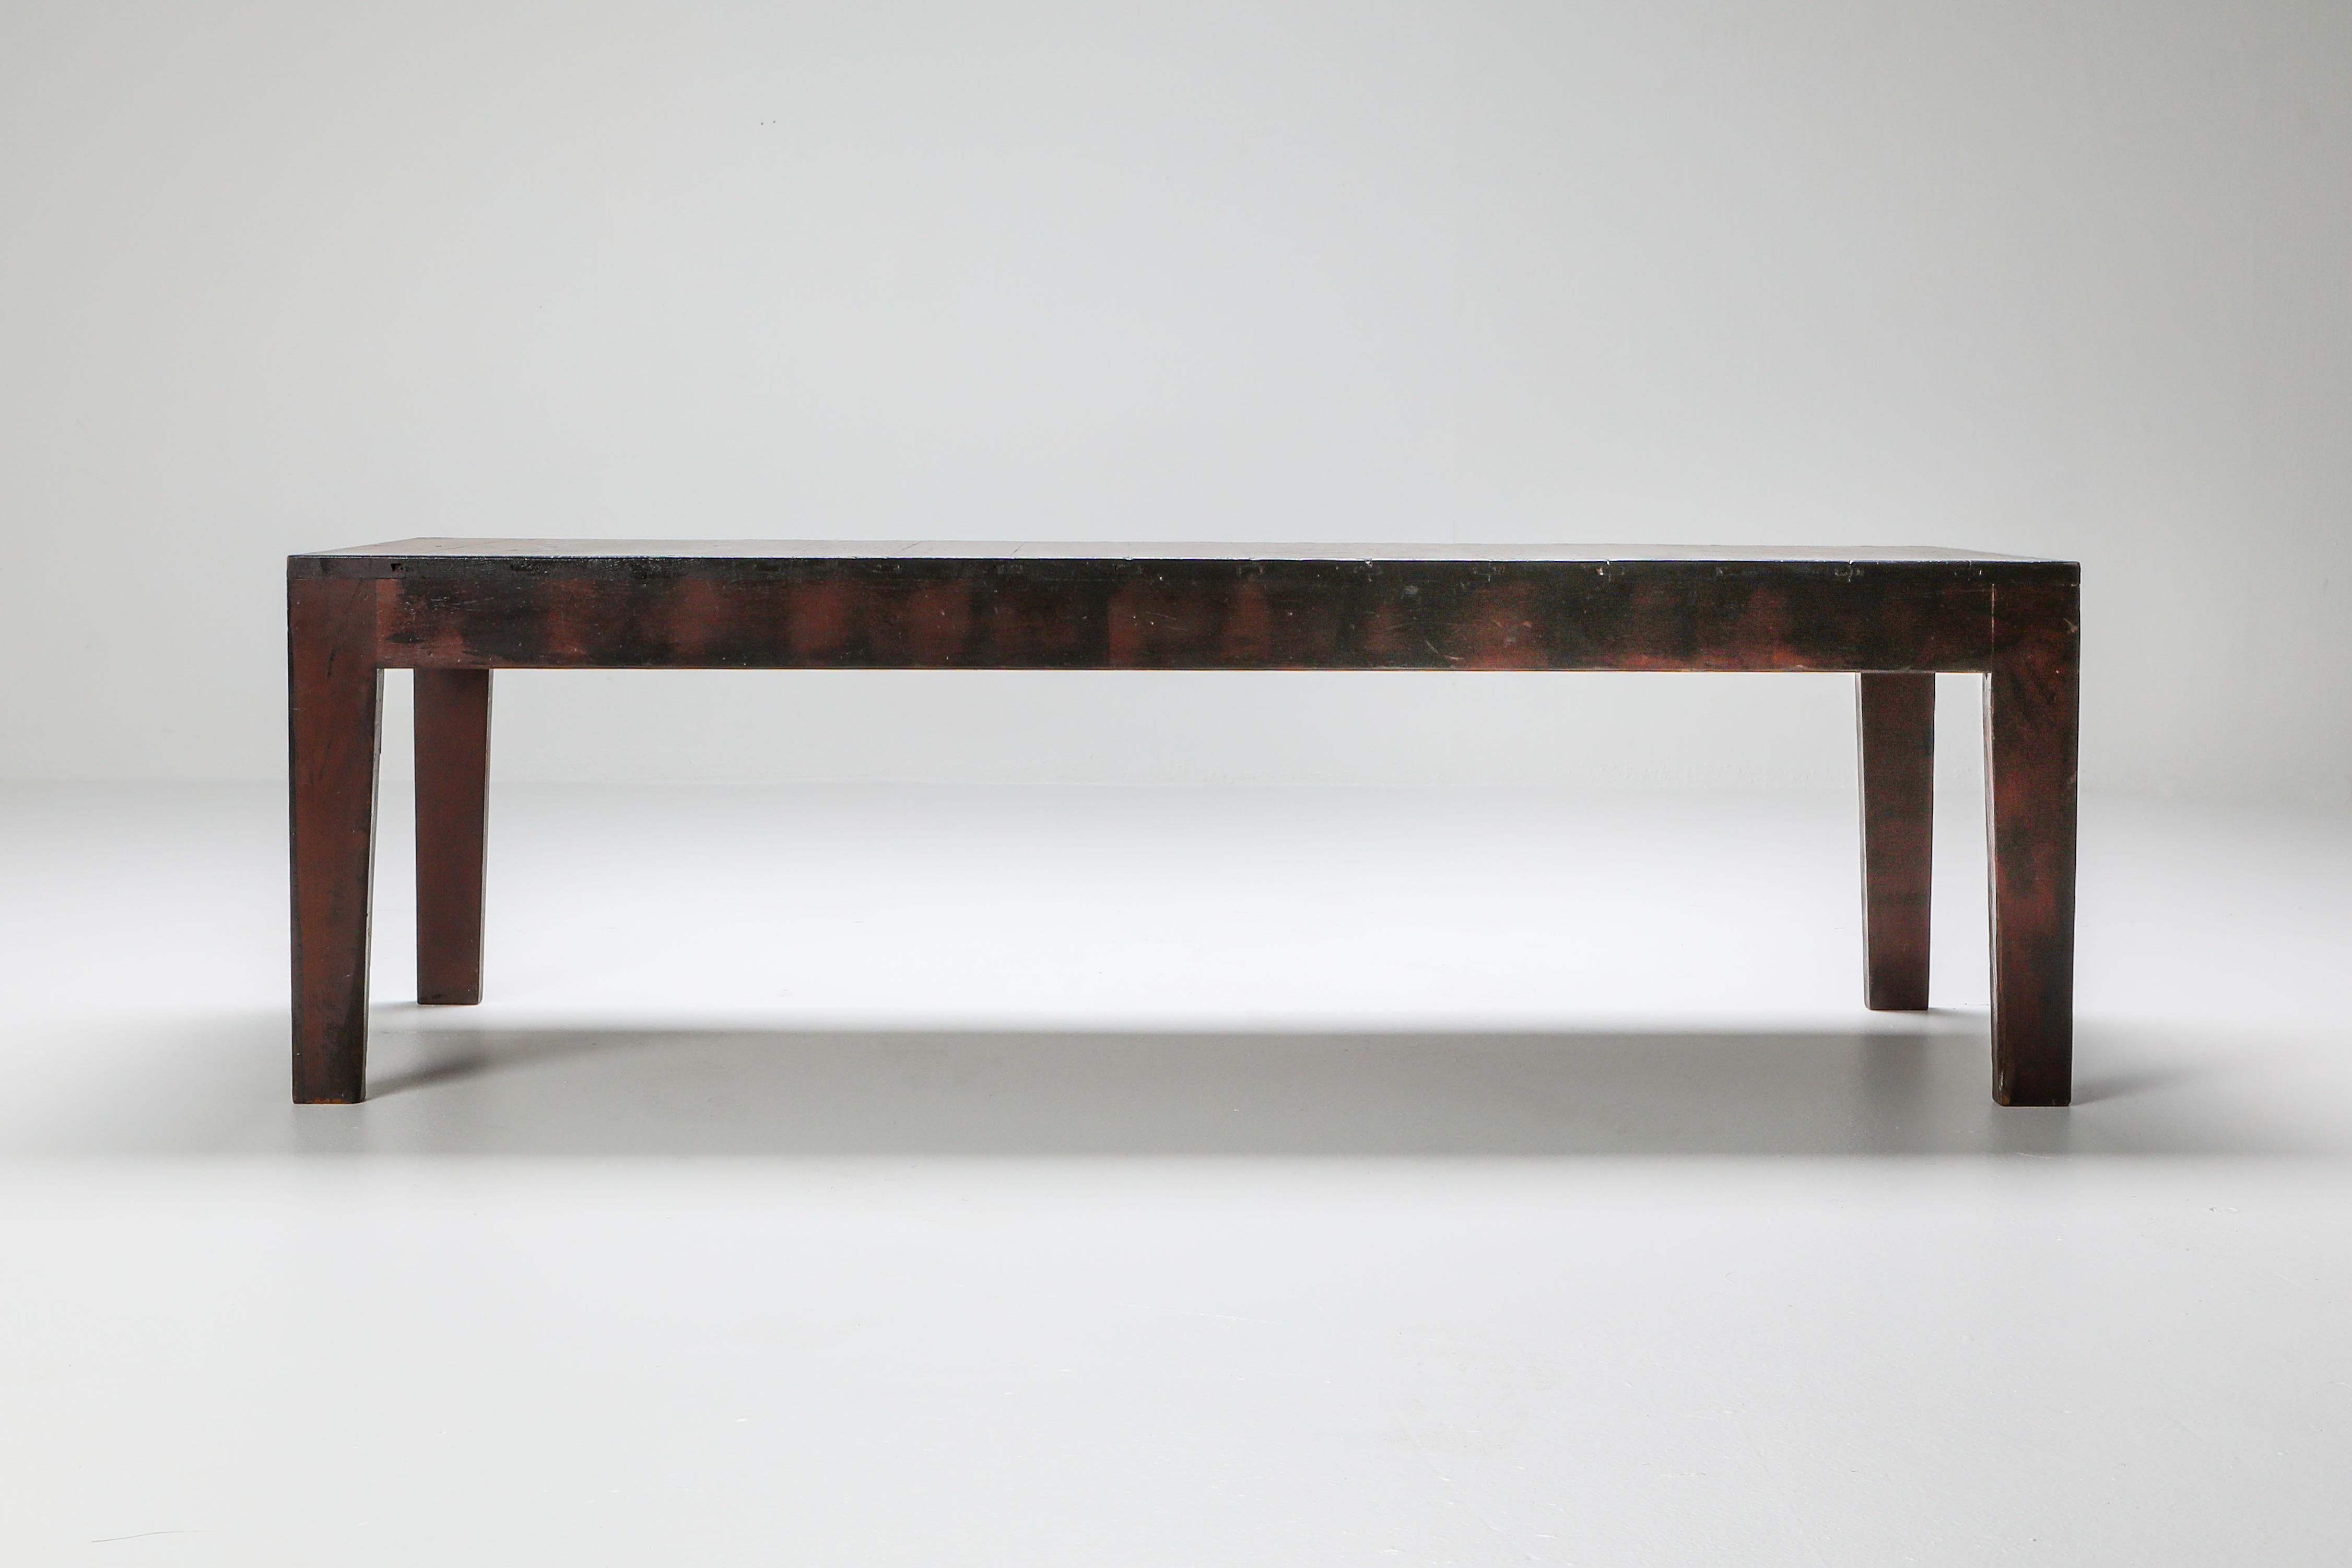 Dom Hans van der Laan coffee table, The Netherlands, 1960s.

Executed by Jan de Jong
 During the reconstruction period after WWII, the Dutch architect Jan de Jong and Dom Hans van der Laan collaborated on several architectural projects including